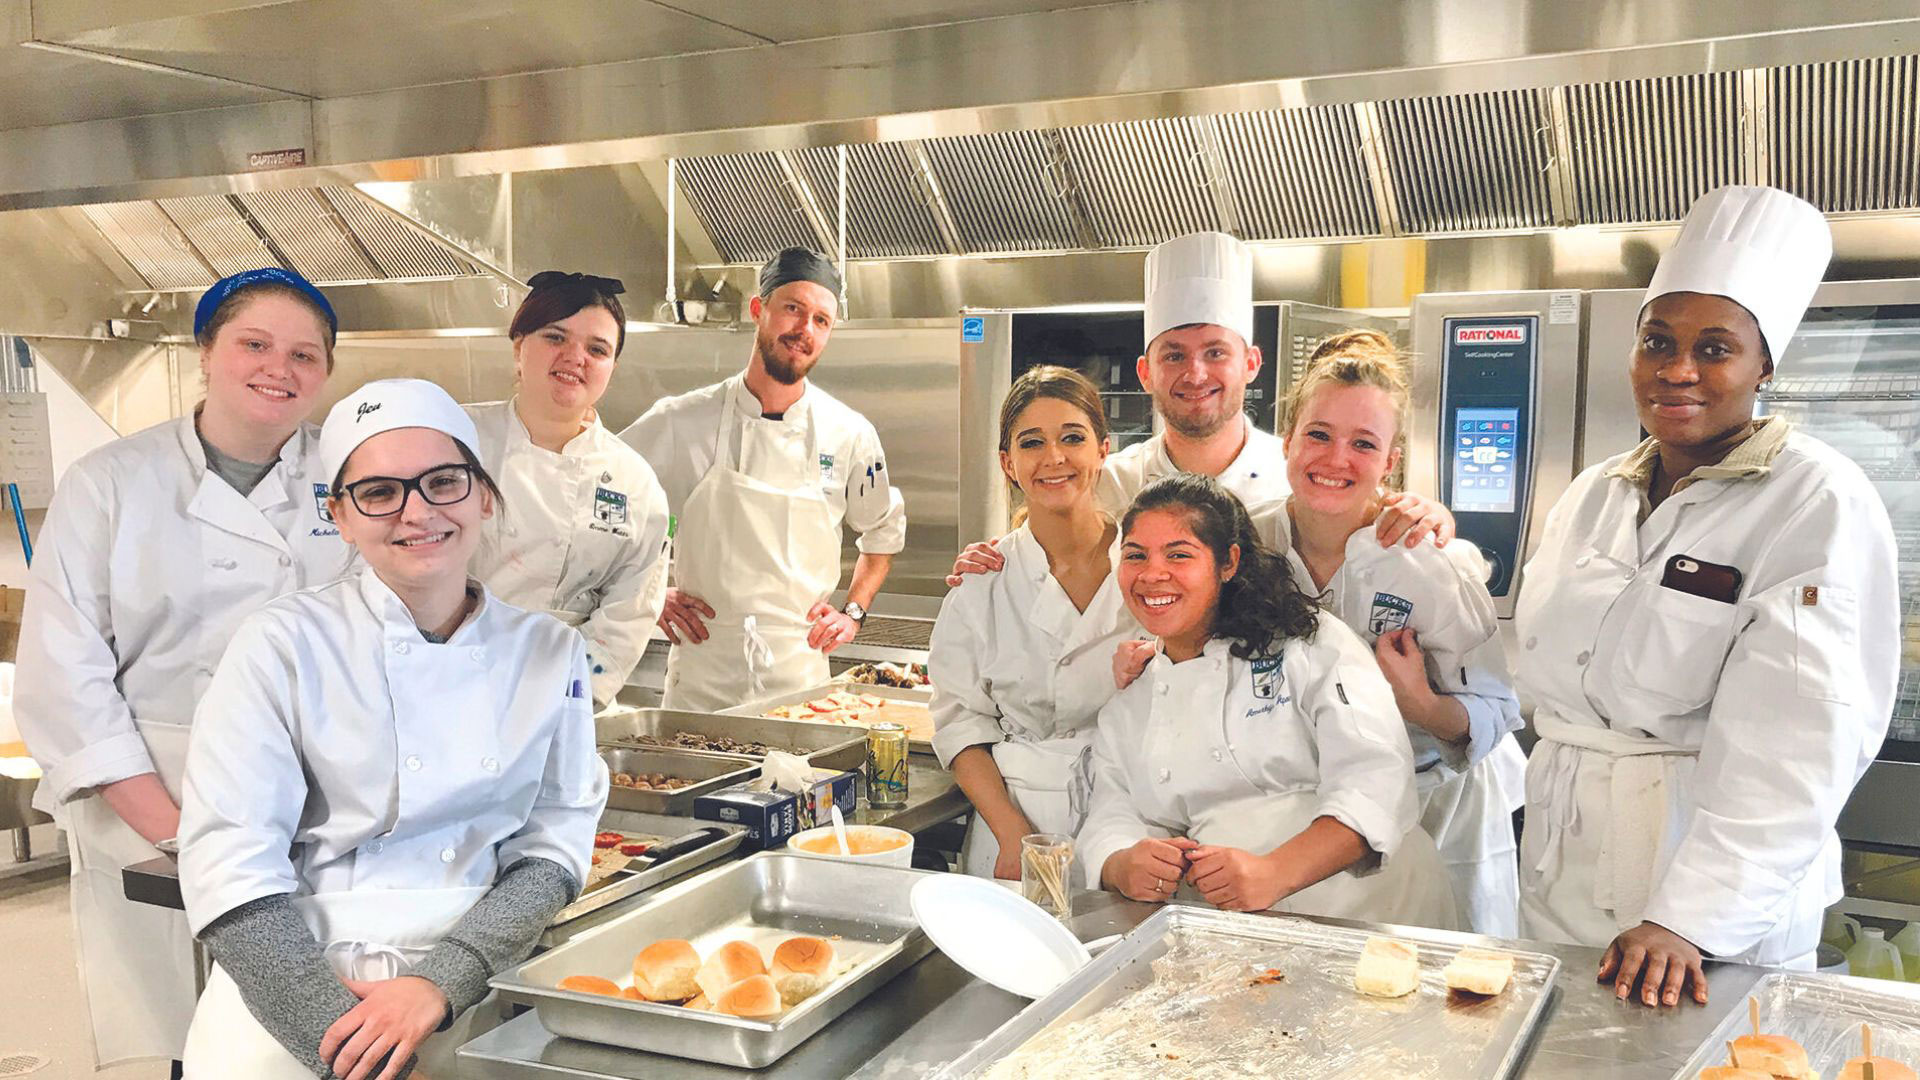 Culinary Arts students in kitchen